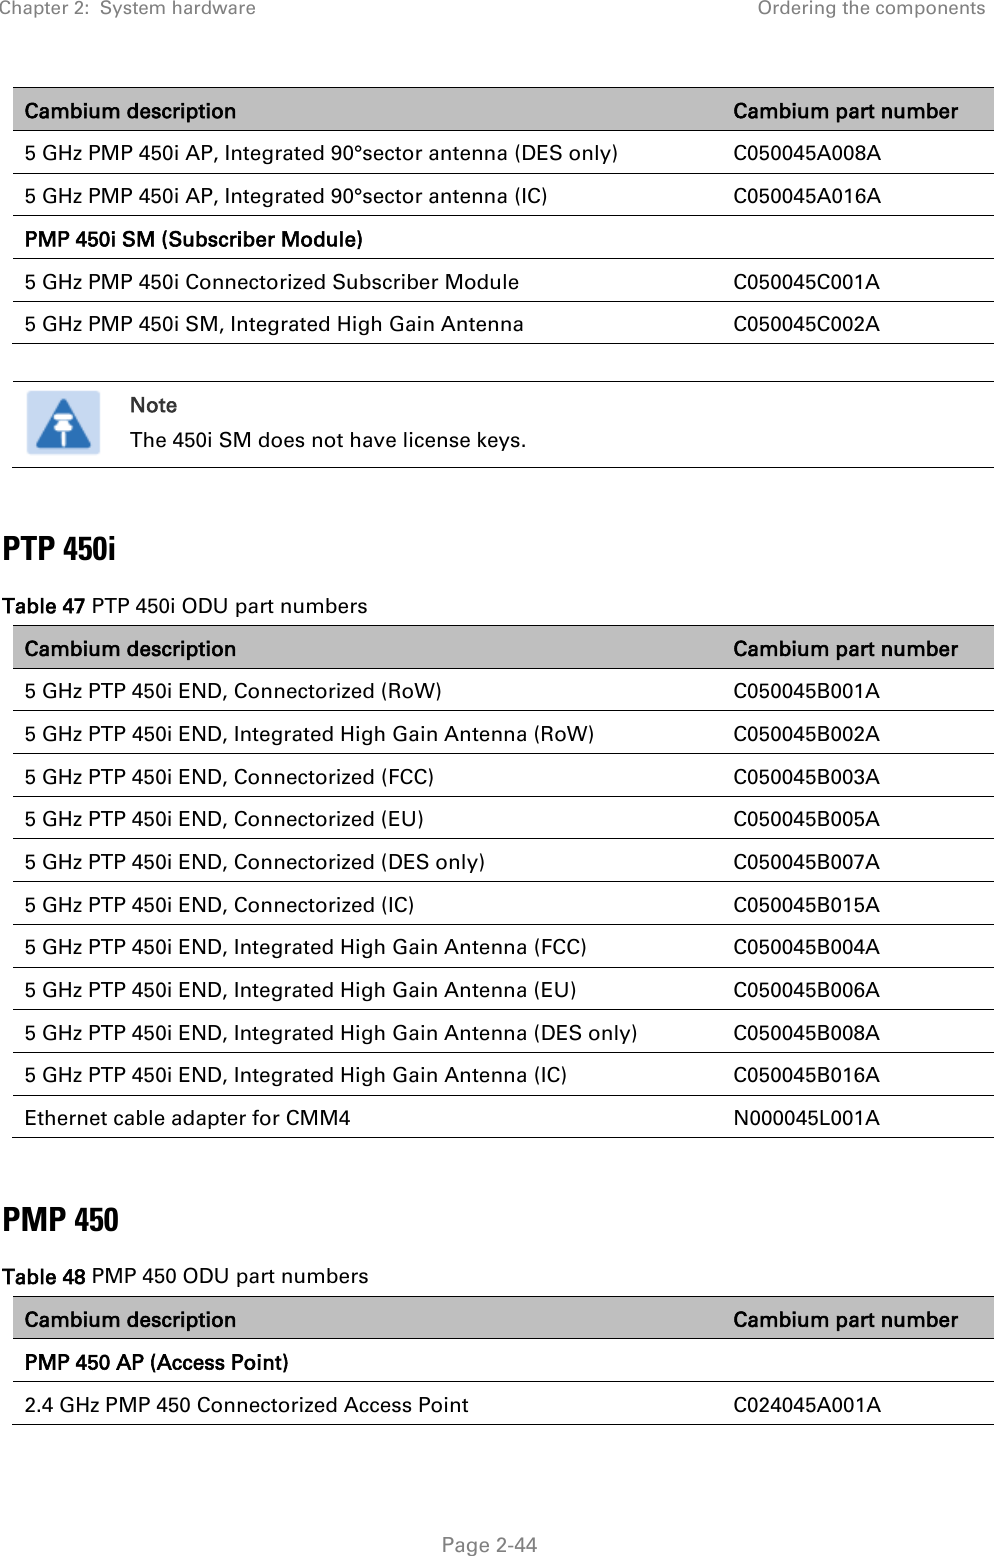 Chapter 2:  System hardware Ordering the components   Page 2-44 Cambium description Cambium part number 5 GHz PMP 450i AP, Integrated 90°sector antenna (DES only) C050045A008A 5 GHz PMP 450i AP, Integrated 90°sector antenna (IC) C050045A016A PMP 450i SM (Subscriber Module)  5 GHz PMP 450i Connectorized Subscriber Module C050045C001A 5 GHz PMP 450i SM, Integrated High Gain Antenna C050045C002A   Note The 450i SM does not have license keys.  PTP 450i Table 47 PTP 450i ODU part numbers Cambium description Cambium part number 5 GHz PTP 450i END, Connectorized (RoW) C050045B001A 5 GHz PTP 450i END, Integrated High Gain Antenna (RoW) C050045B002A 5 GHz PTP 450i END, Connectorized (FCC) C050045B003A 5 GHz PTP 450i END, Connectorized (EU)  C050045B005A 5 GHz PTP 450i END, Connectorized (DES only) C050045B007A 5 GHz PTP 450i END, Connectorized (IC) C050045B015A 5 GHz PTP 450i END, Integrated High Gain Antenna (FCC) C050045B004A 5 GHz PTP 450i END, Integrated High Gain Antenna (EU)  C050045B006A 5 GHz PTP 450i END, Integrated High Gain Antenna (DES only) C050045B008A 5 GHz PTP 450i END, Integrated High Gain Antenna (IC) C050045B016A Ethernet cable adapter for CMM4 N000045L001A  PMP 450 Table 48 PMP 450 ODU part numbers Cambium description Cambium part number PMP 450 AP (Access Point)   2.4 GHz PMP 450 Connectorized Access Point C024045A001A 